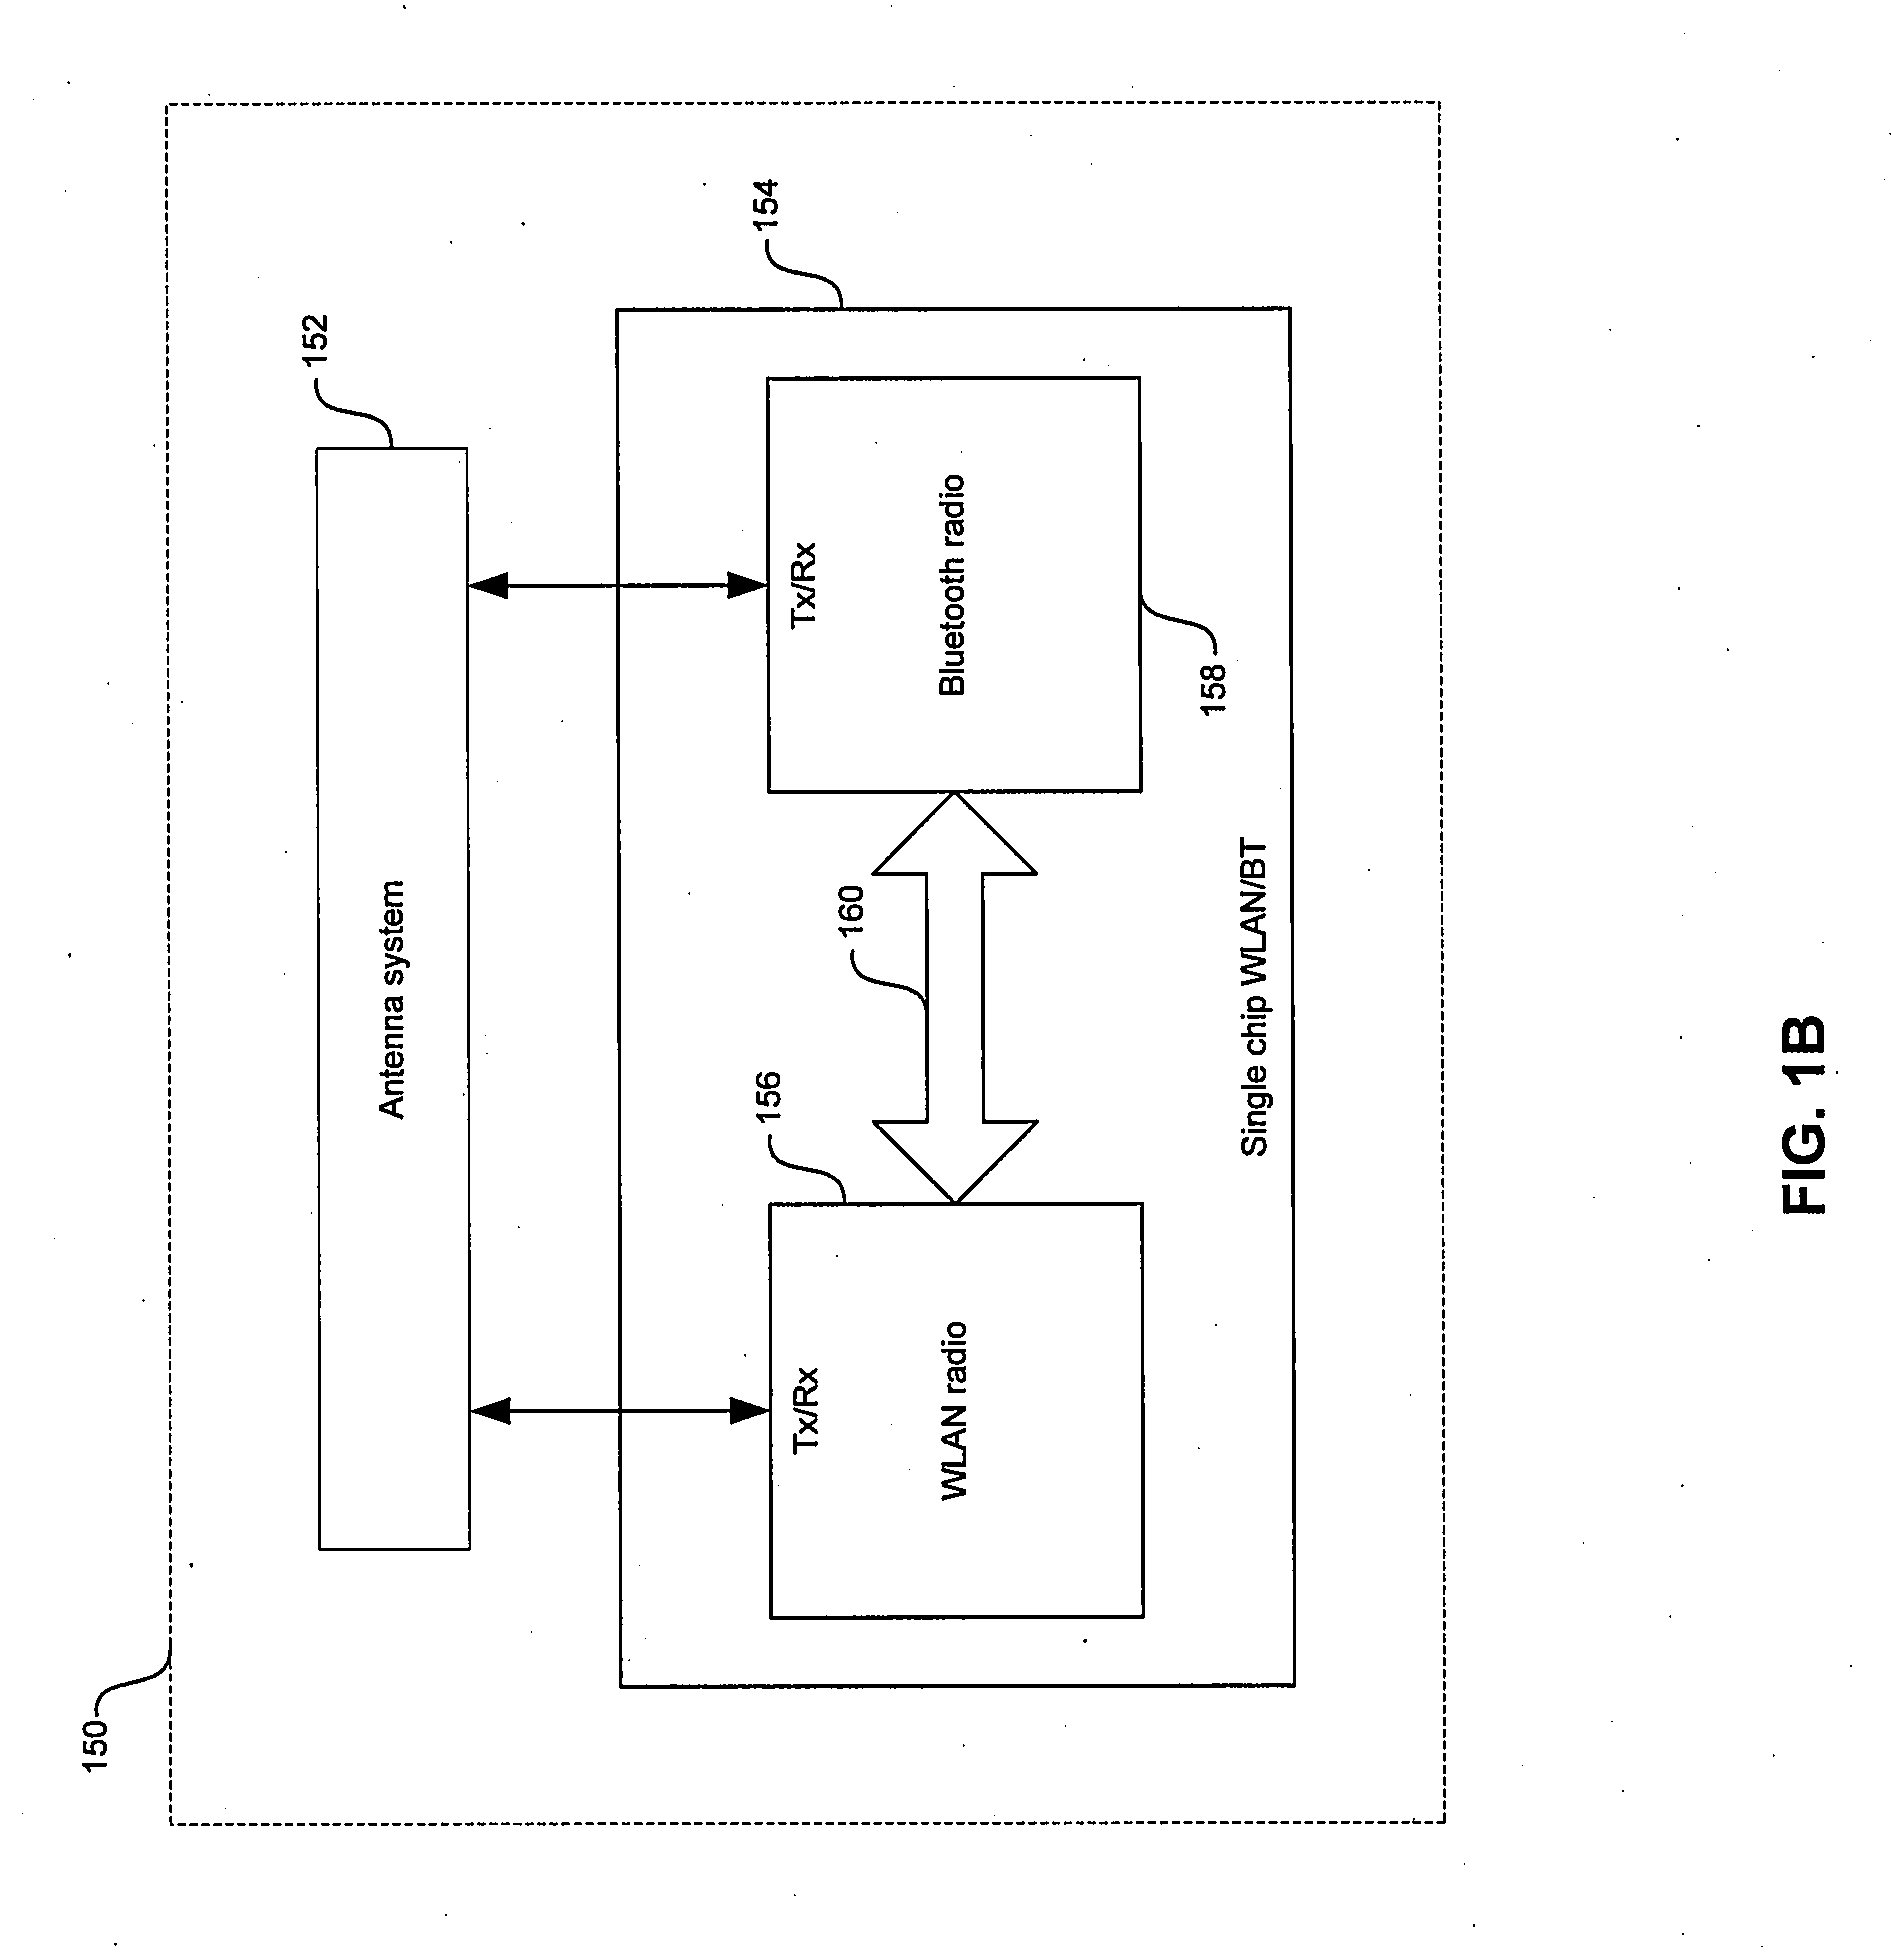 Method and System for a Wideband Polar Transmitter